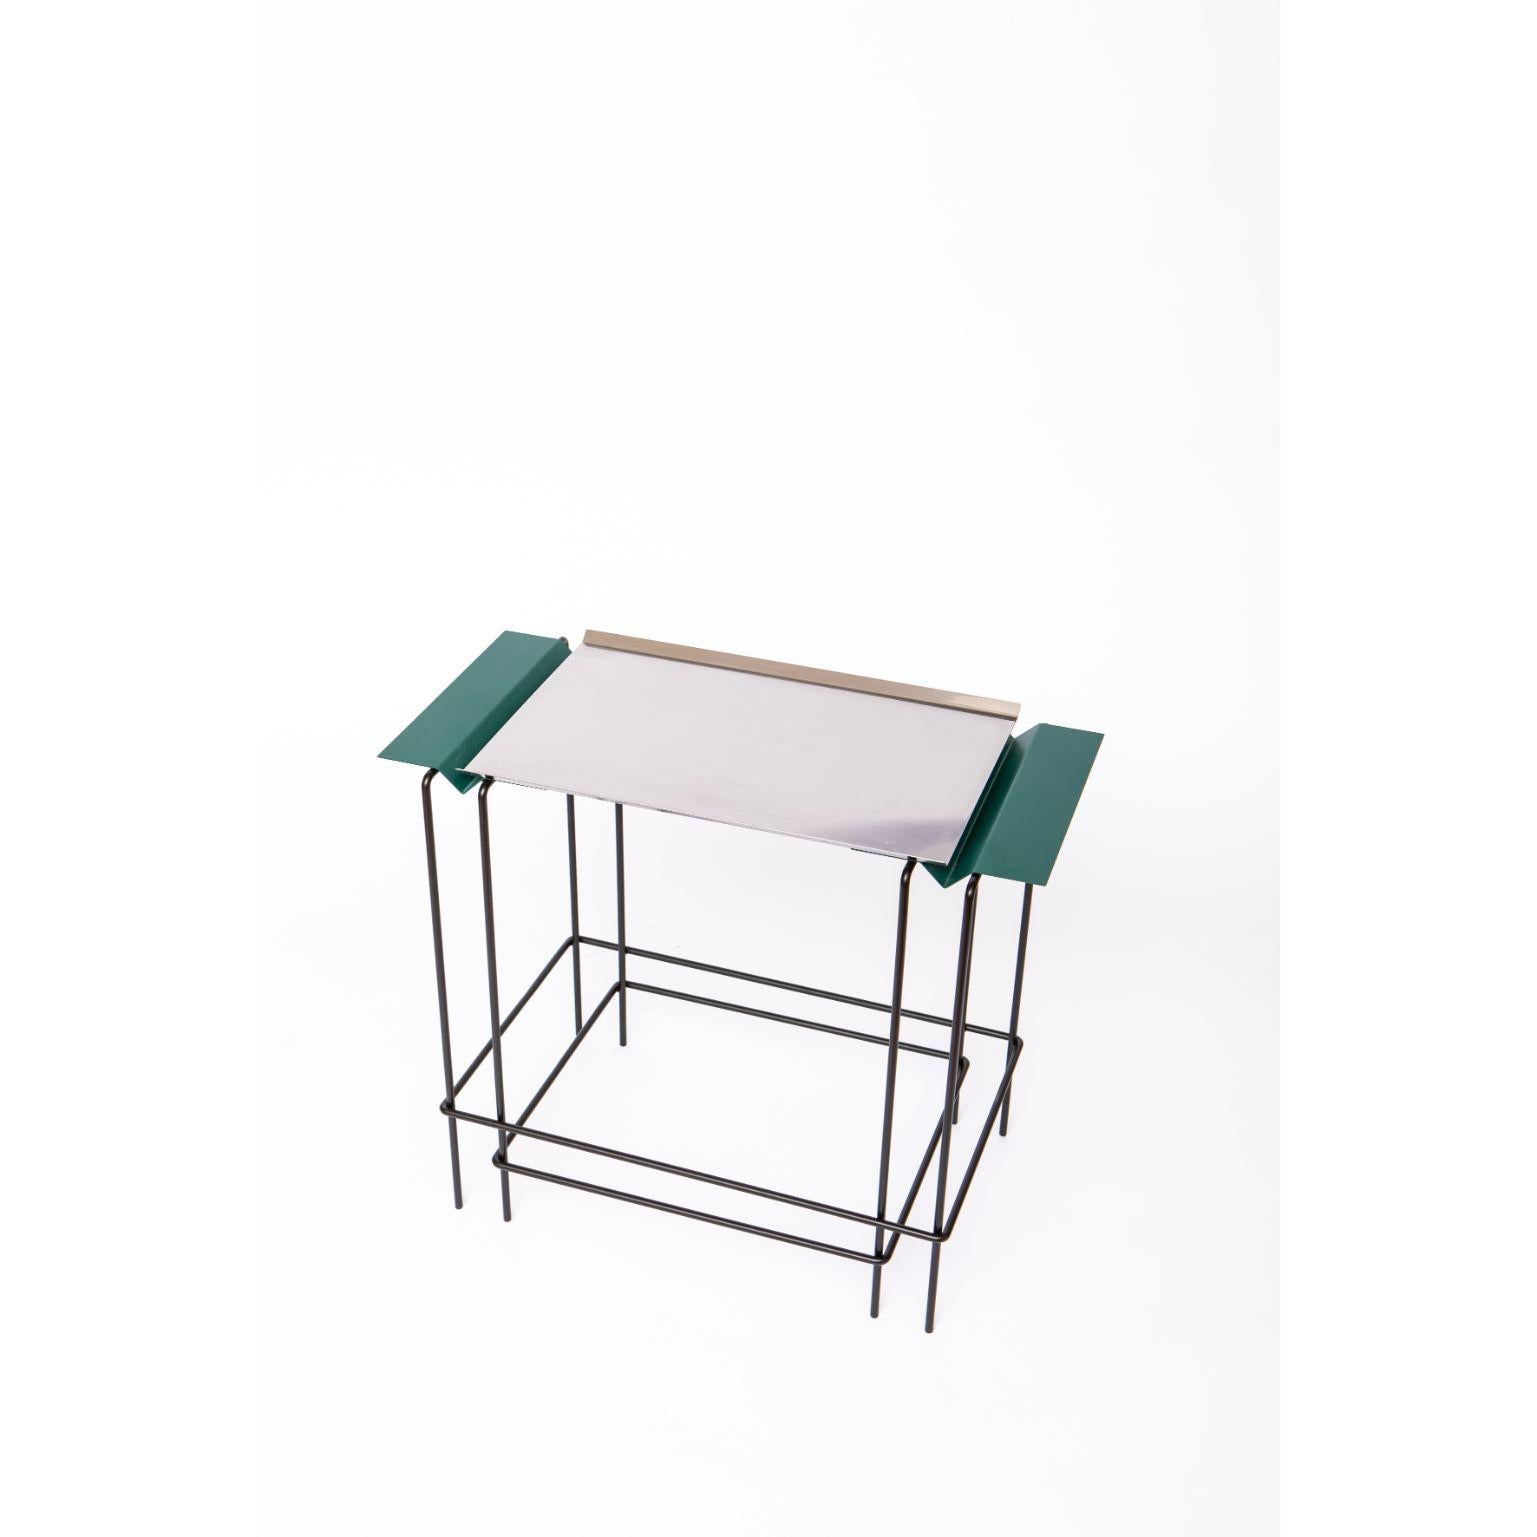 Leva 50 - Table by Alva Design
Materials: Painted Metal, Stainless Steel
Dimensions: 60 x 50 x 32 cm

ALVA is a furniture and objects design office, formed by brothers Susana Bastos, artist and designer, and Marcelo Alvarenga, architect. Their